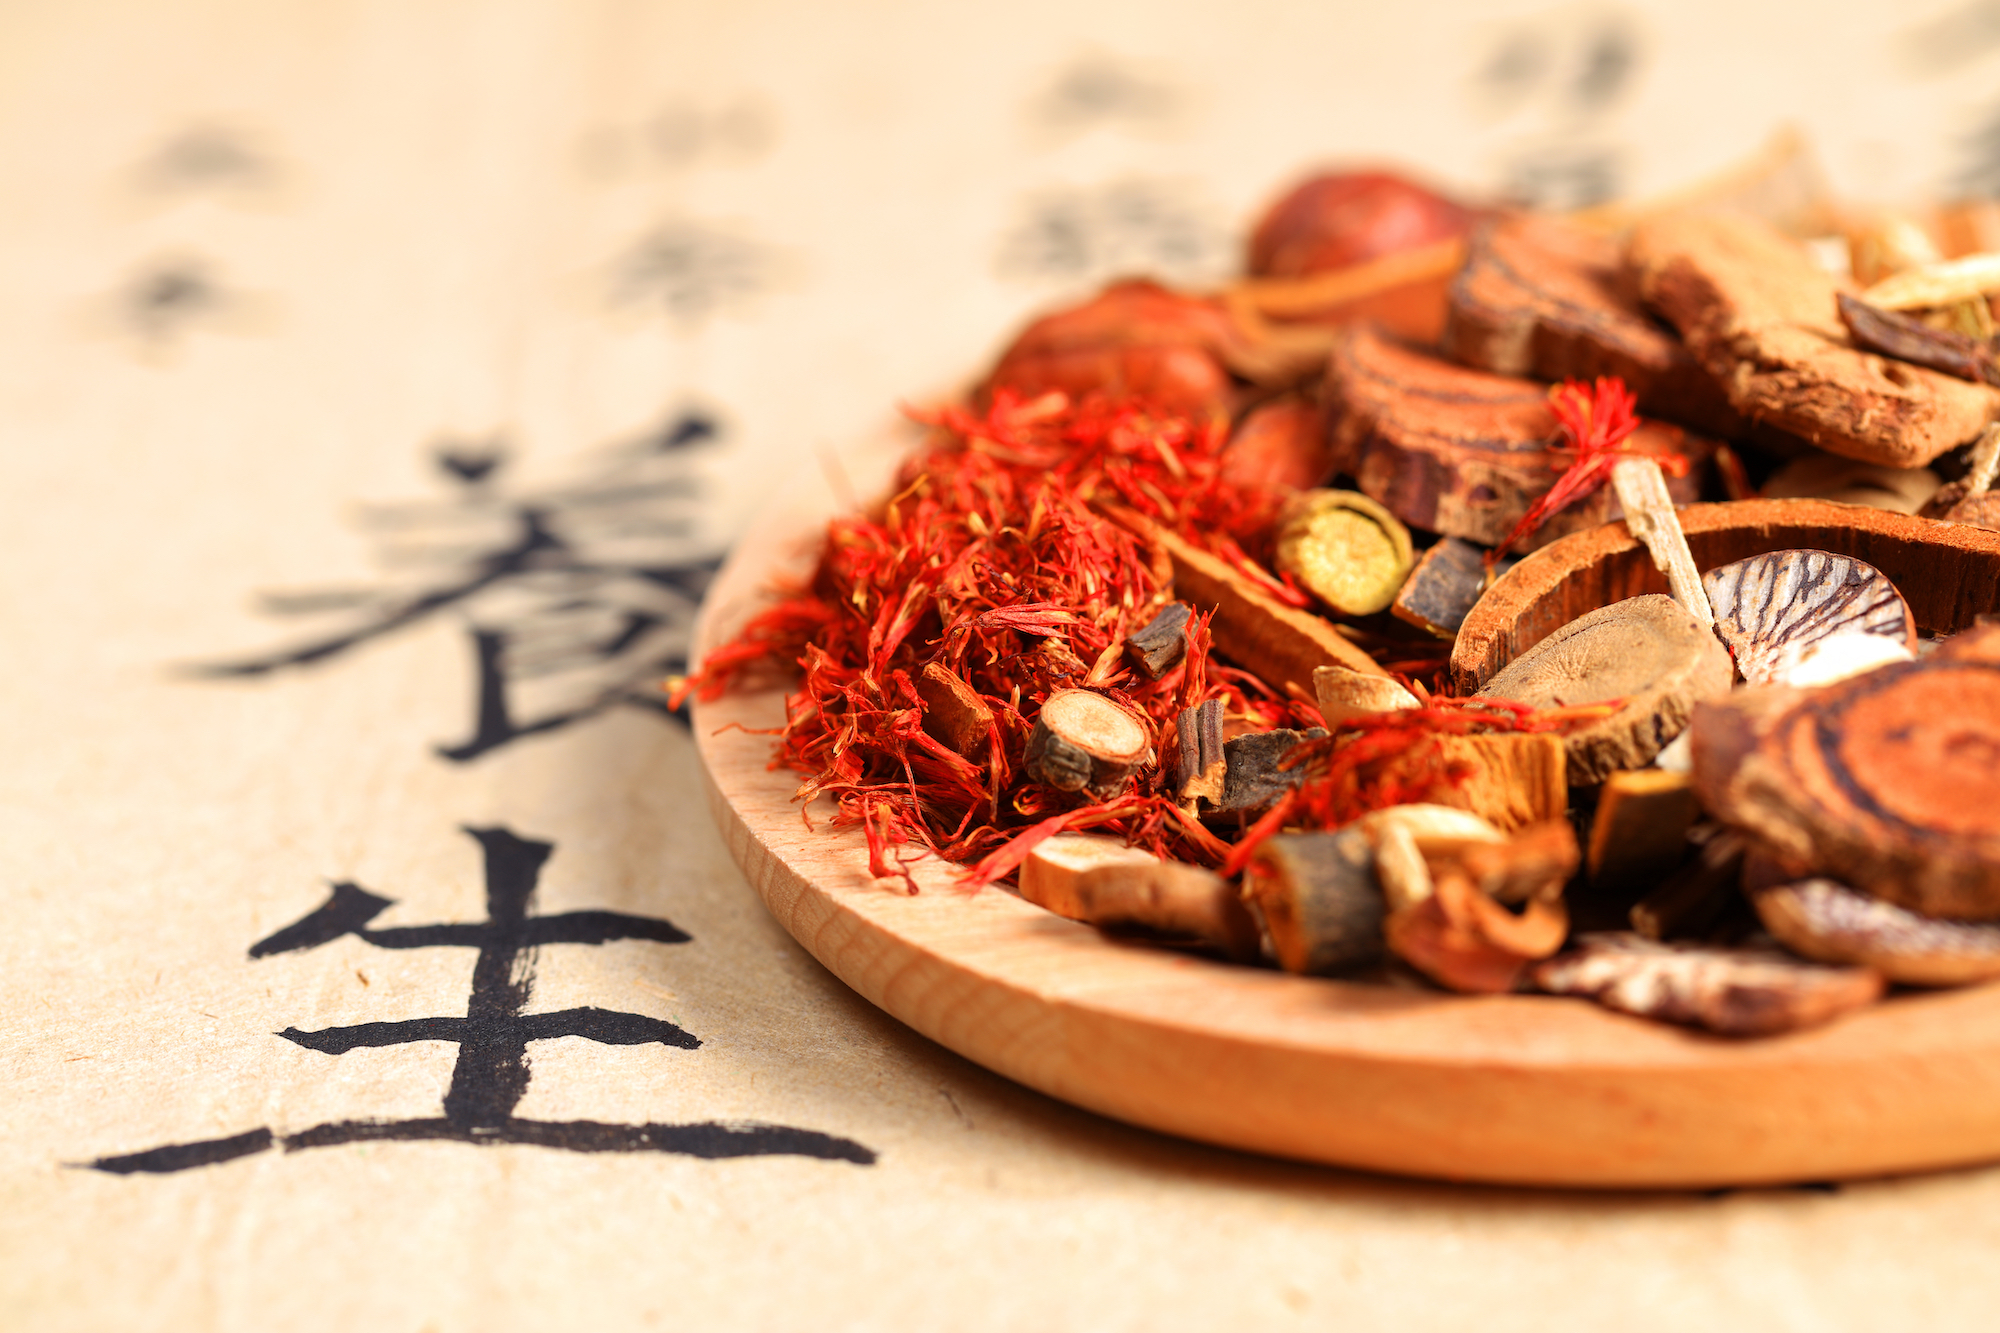 Chinese herbs on a wood plate